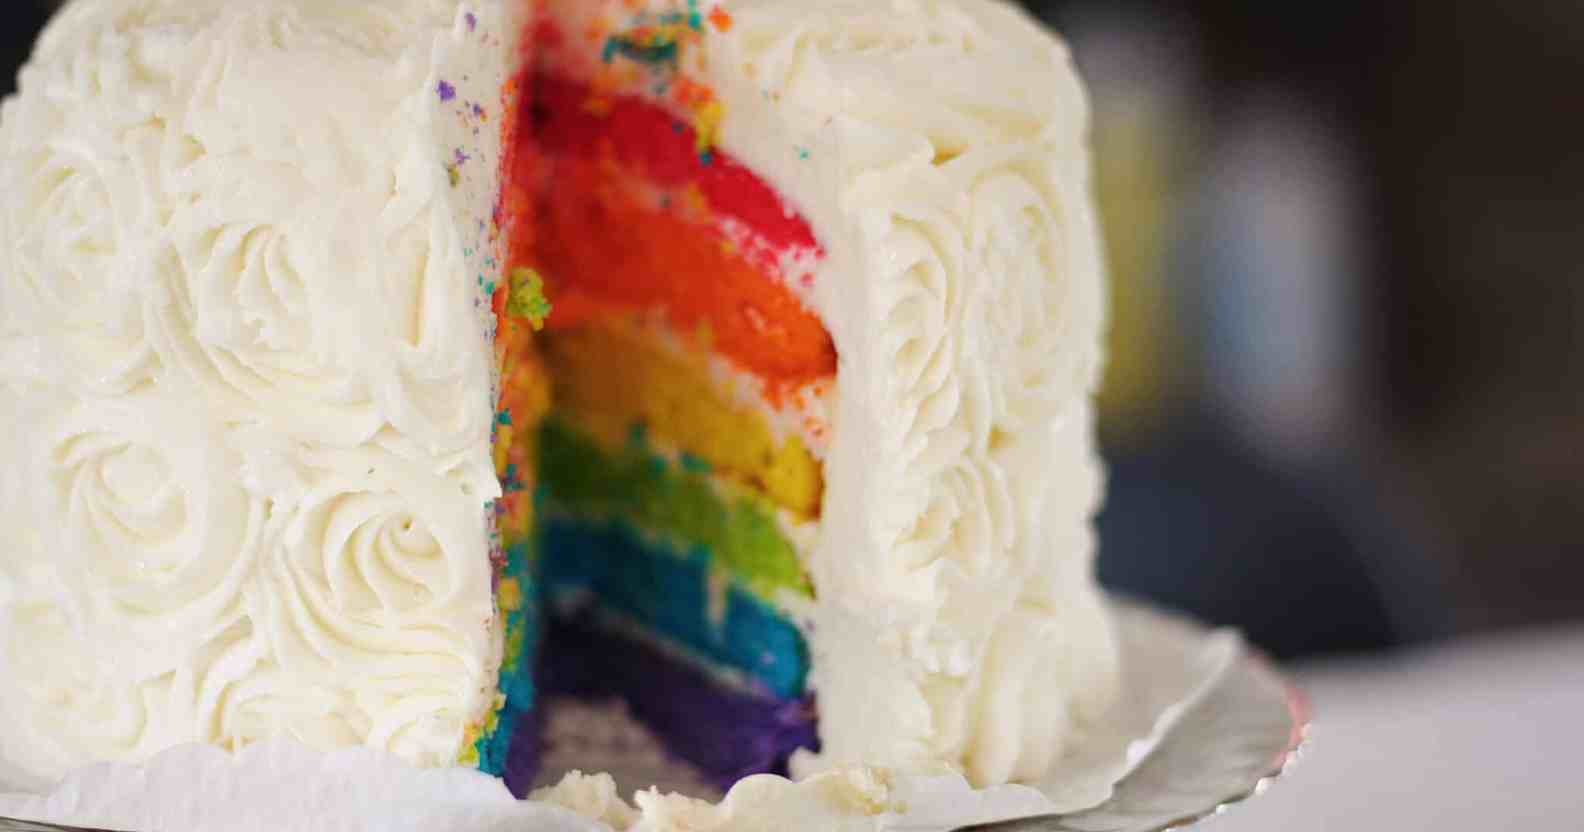 Baker comes to the rescue after lesbian couple denied wedding cake by homophobe